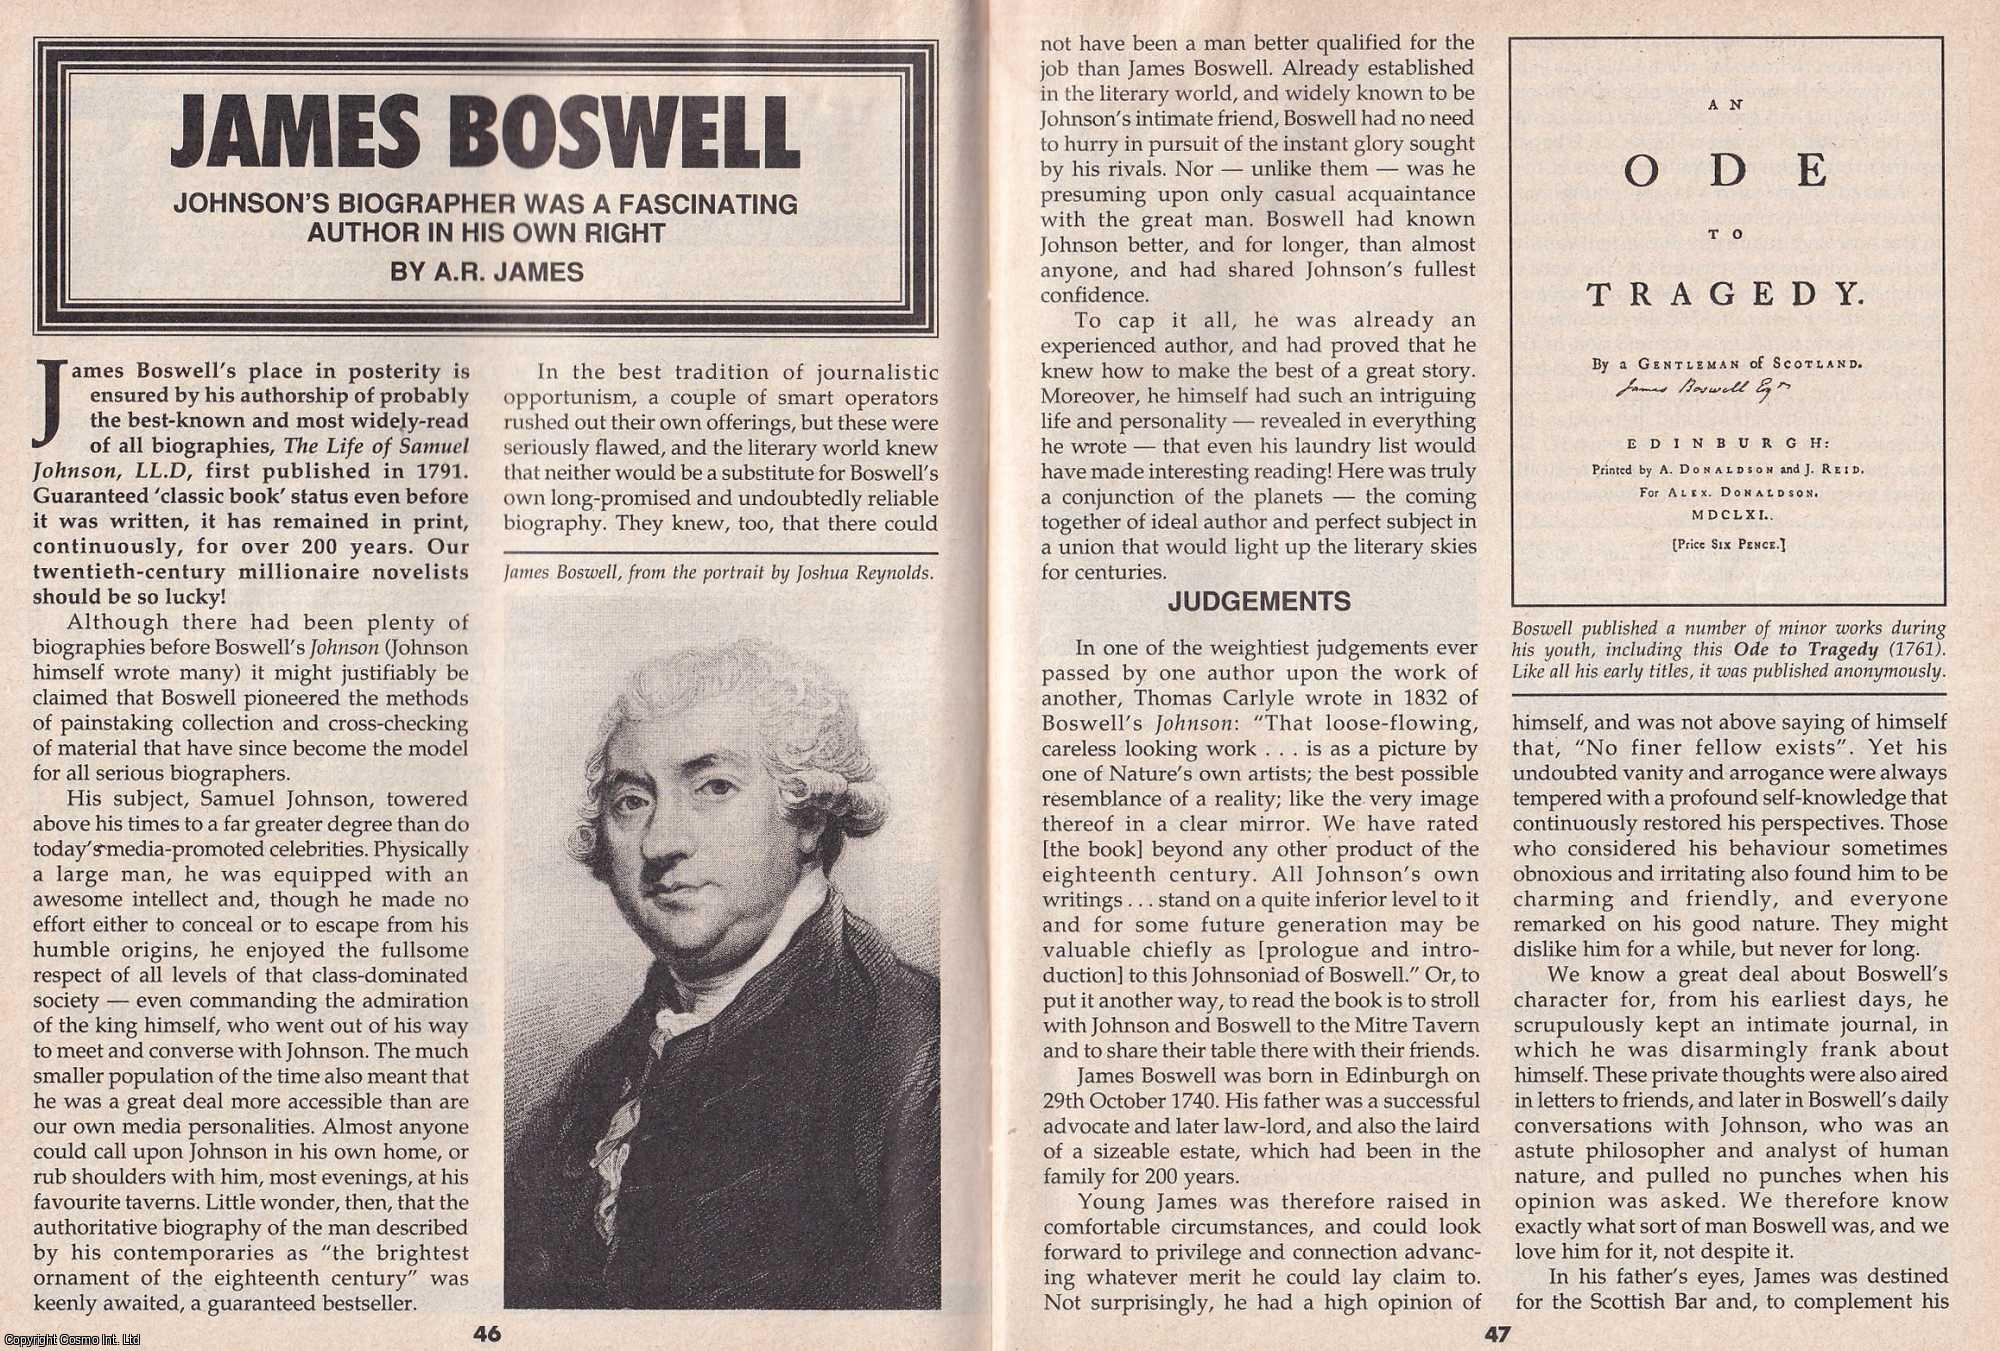 A. R. James - James Boswell. Johnson's Biographer was a Fascinating Author in his own Right. This is an original article separated from an issue of The Book & Magazine Collector publication.